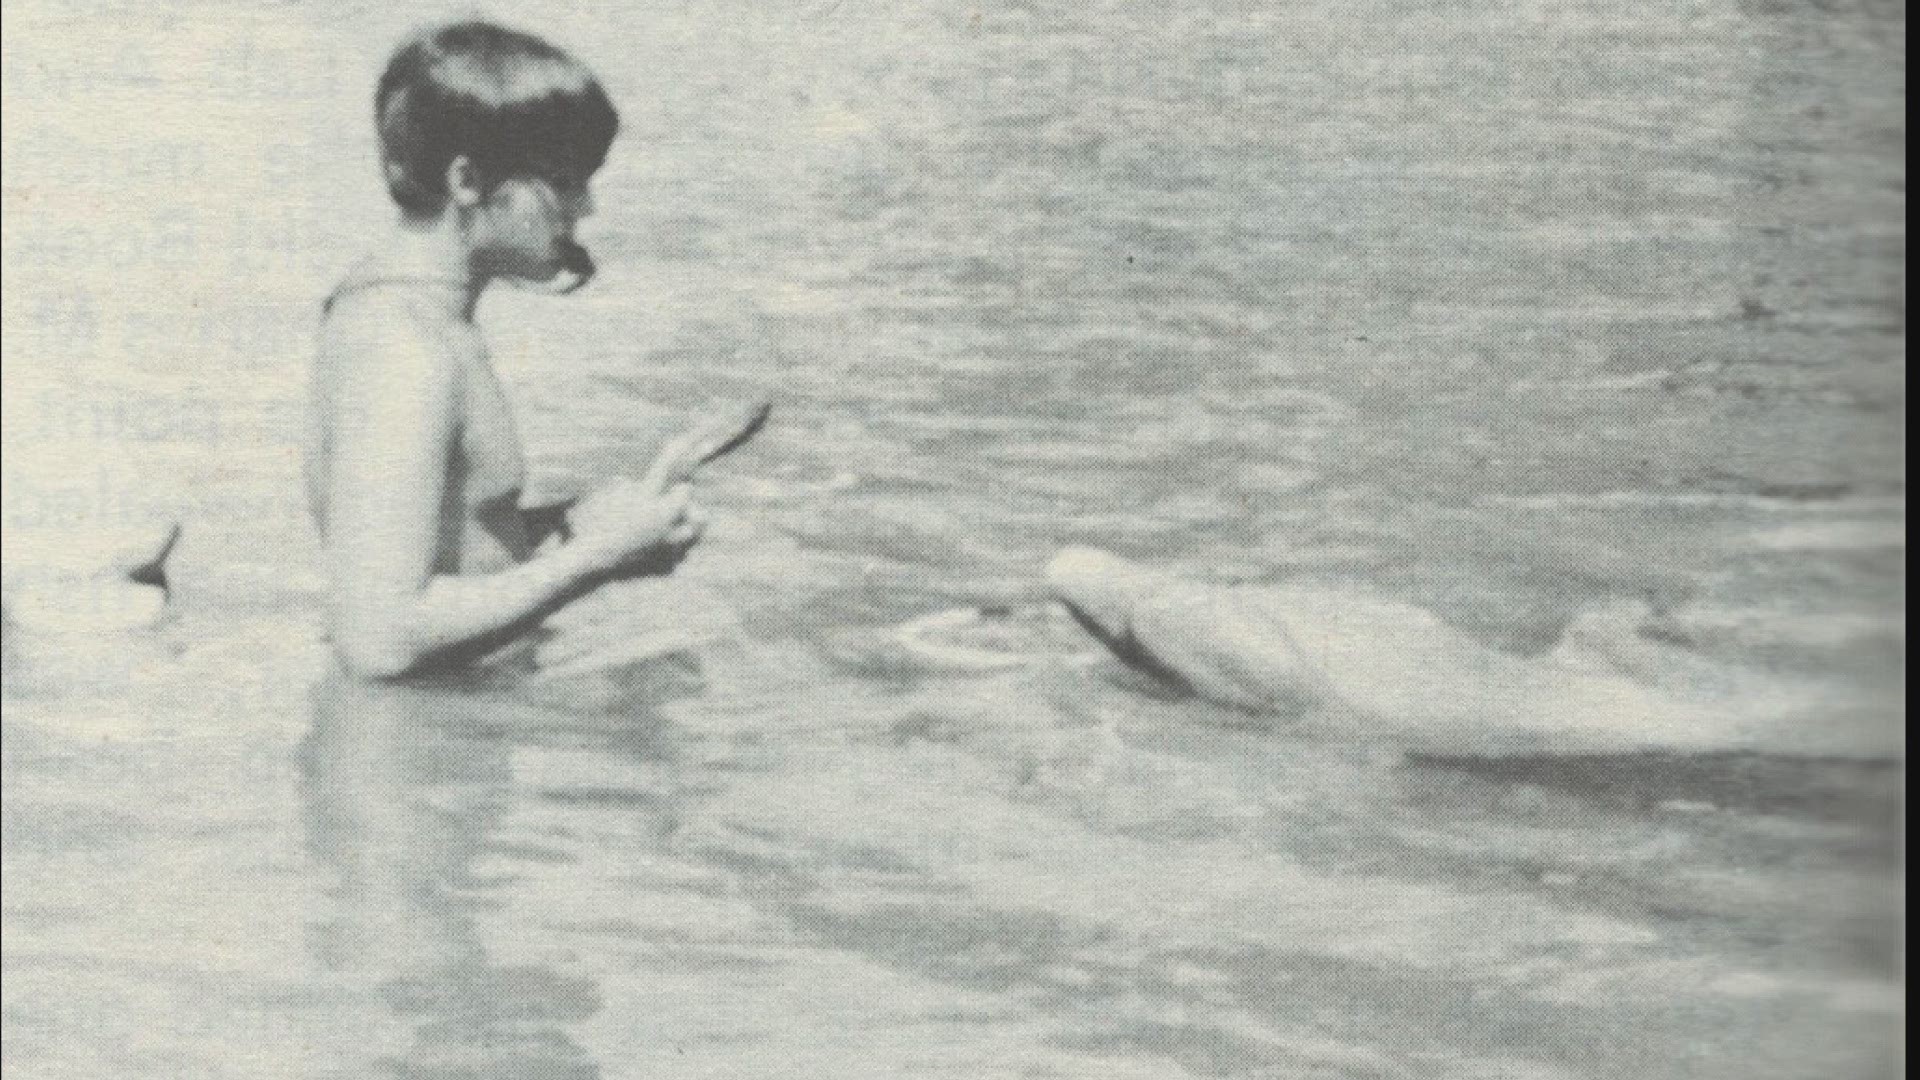 Sarasota Dolphin Research Program Director Randall Wells shares what he's learned in his decades of studying dolphins.